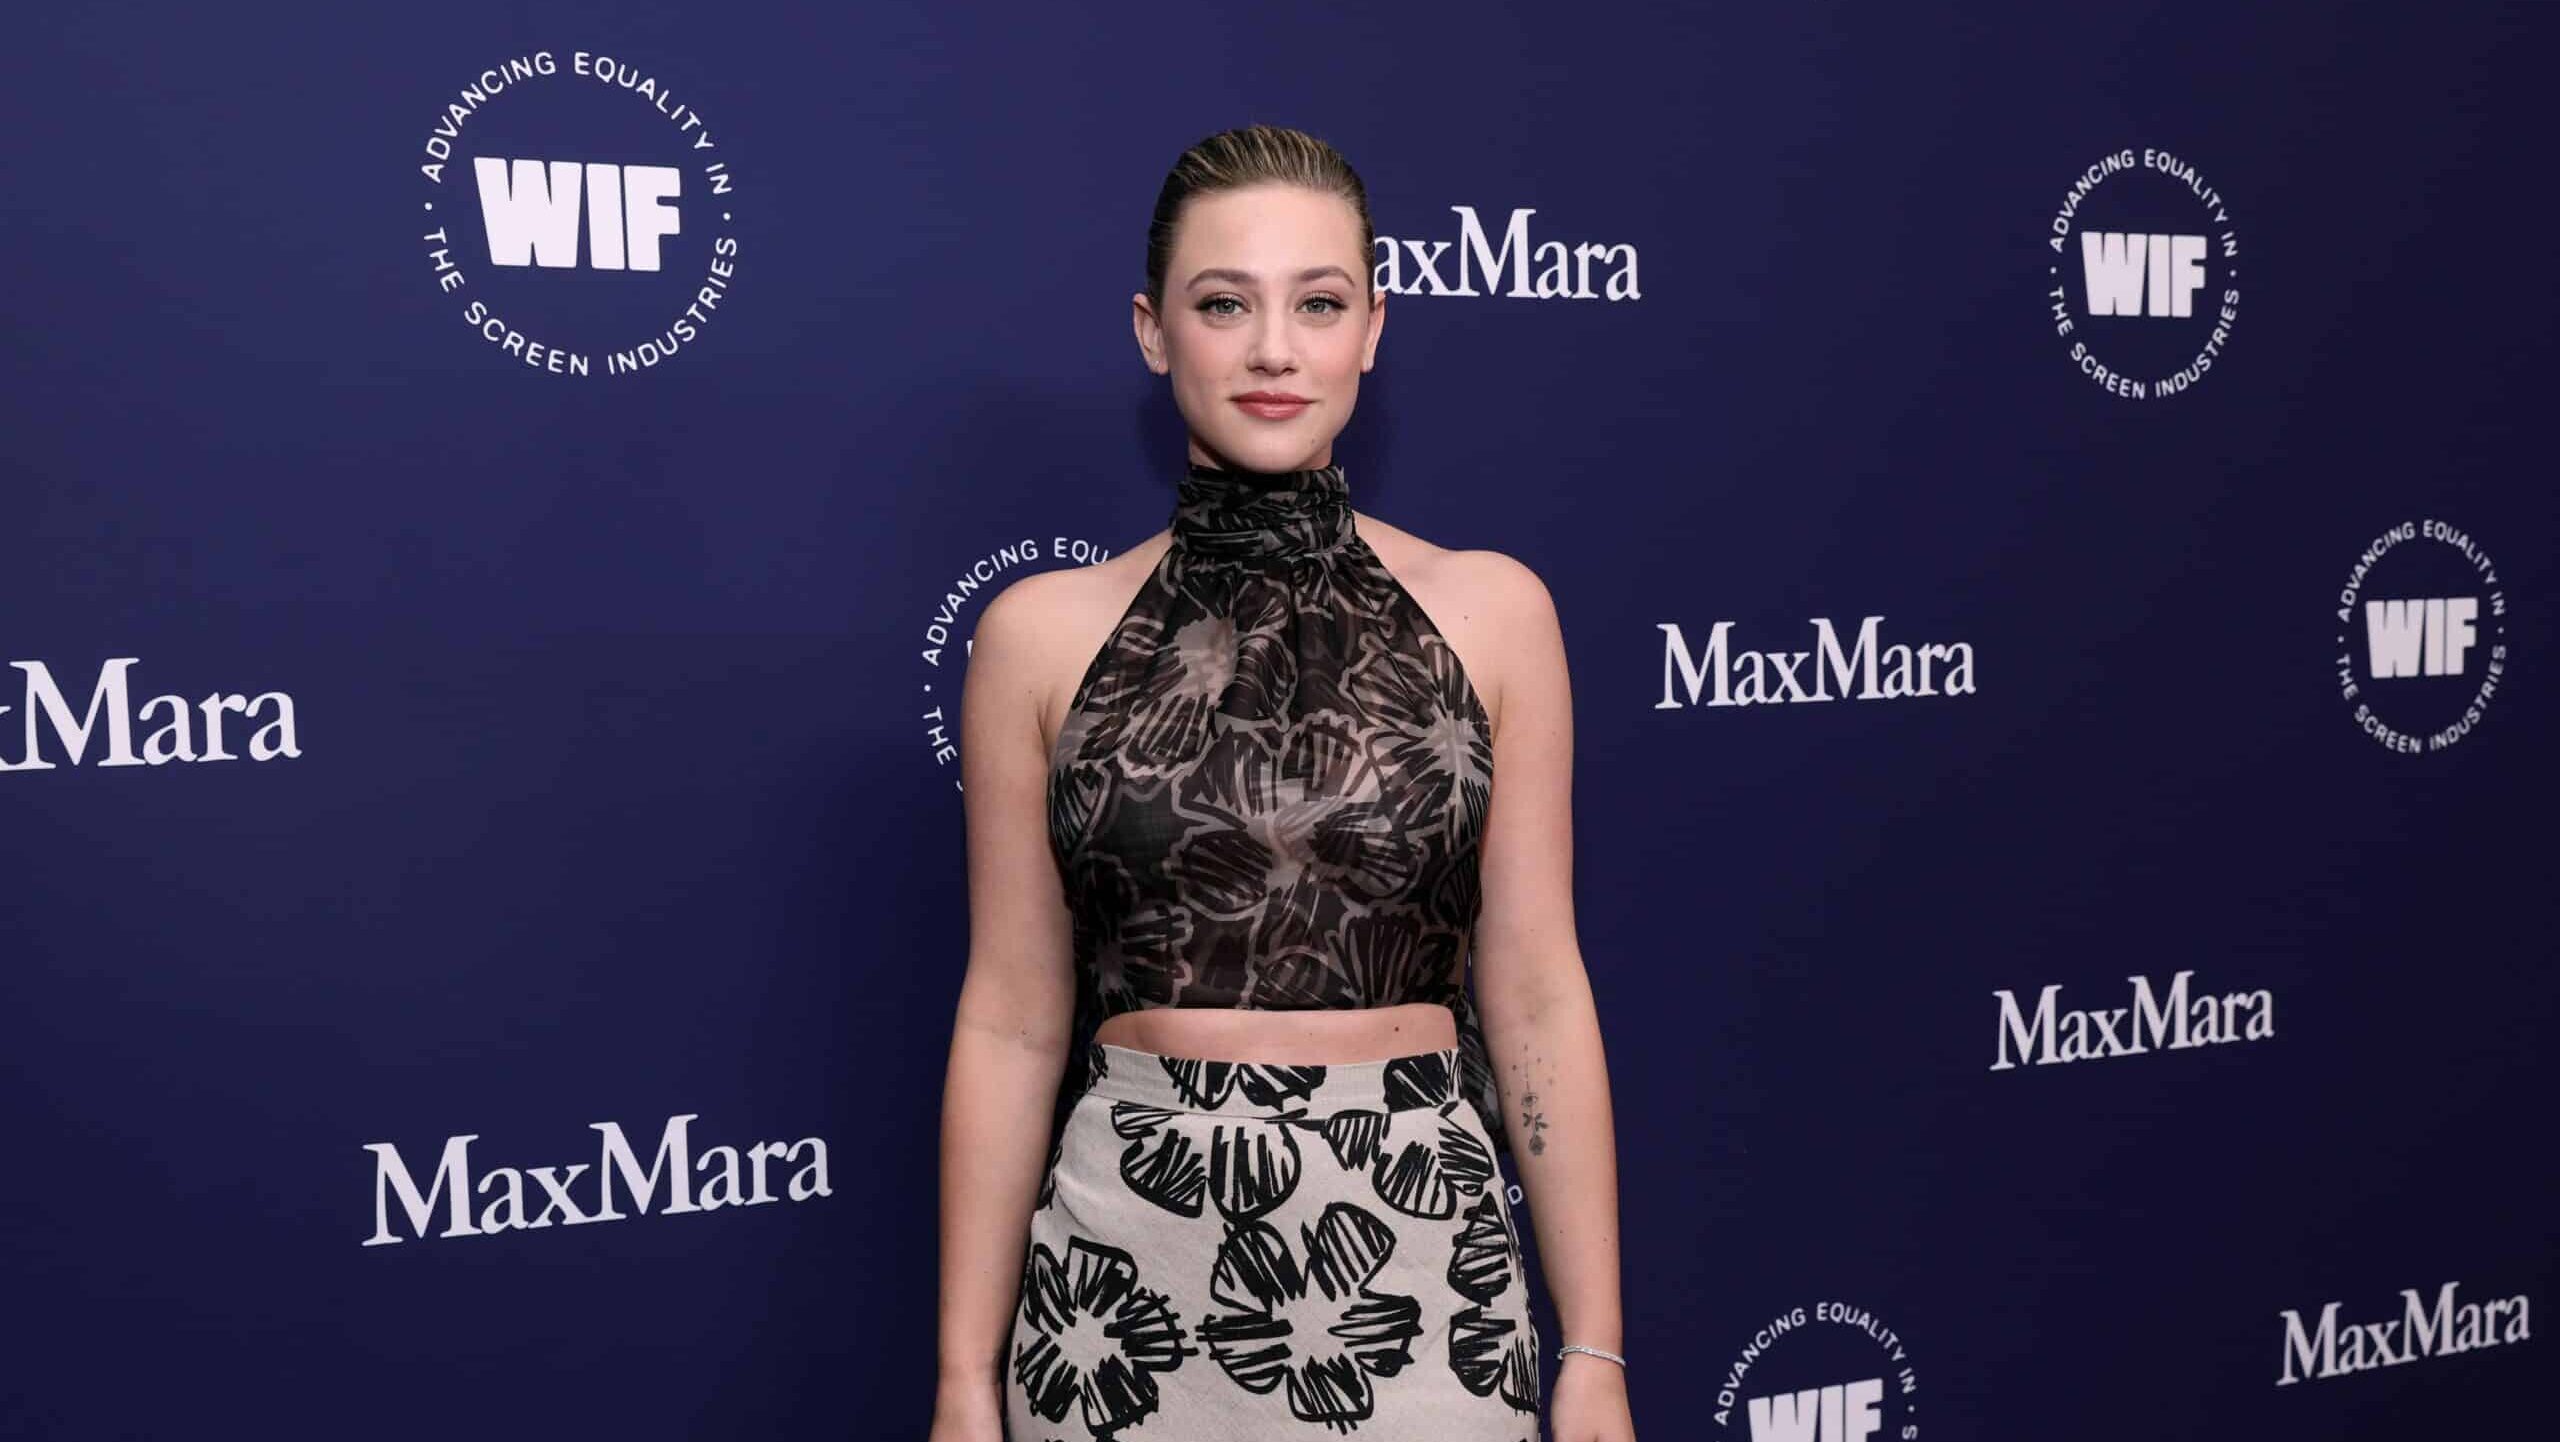 BEVERLY HILLS, CALIFORNIA - OCTOBER 27: Lili Reinhart, wearing Max Mara, attends the WIF Honors: Forging Forward Gala sponsored by Max Mara, ShivHans Pictures, Lexus and STARZ at The Beverly Hilton on October 27, 2022 in Beverly Hills, California. (Photo by Emma McIntyre/Getty Images for WIF